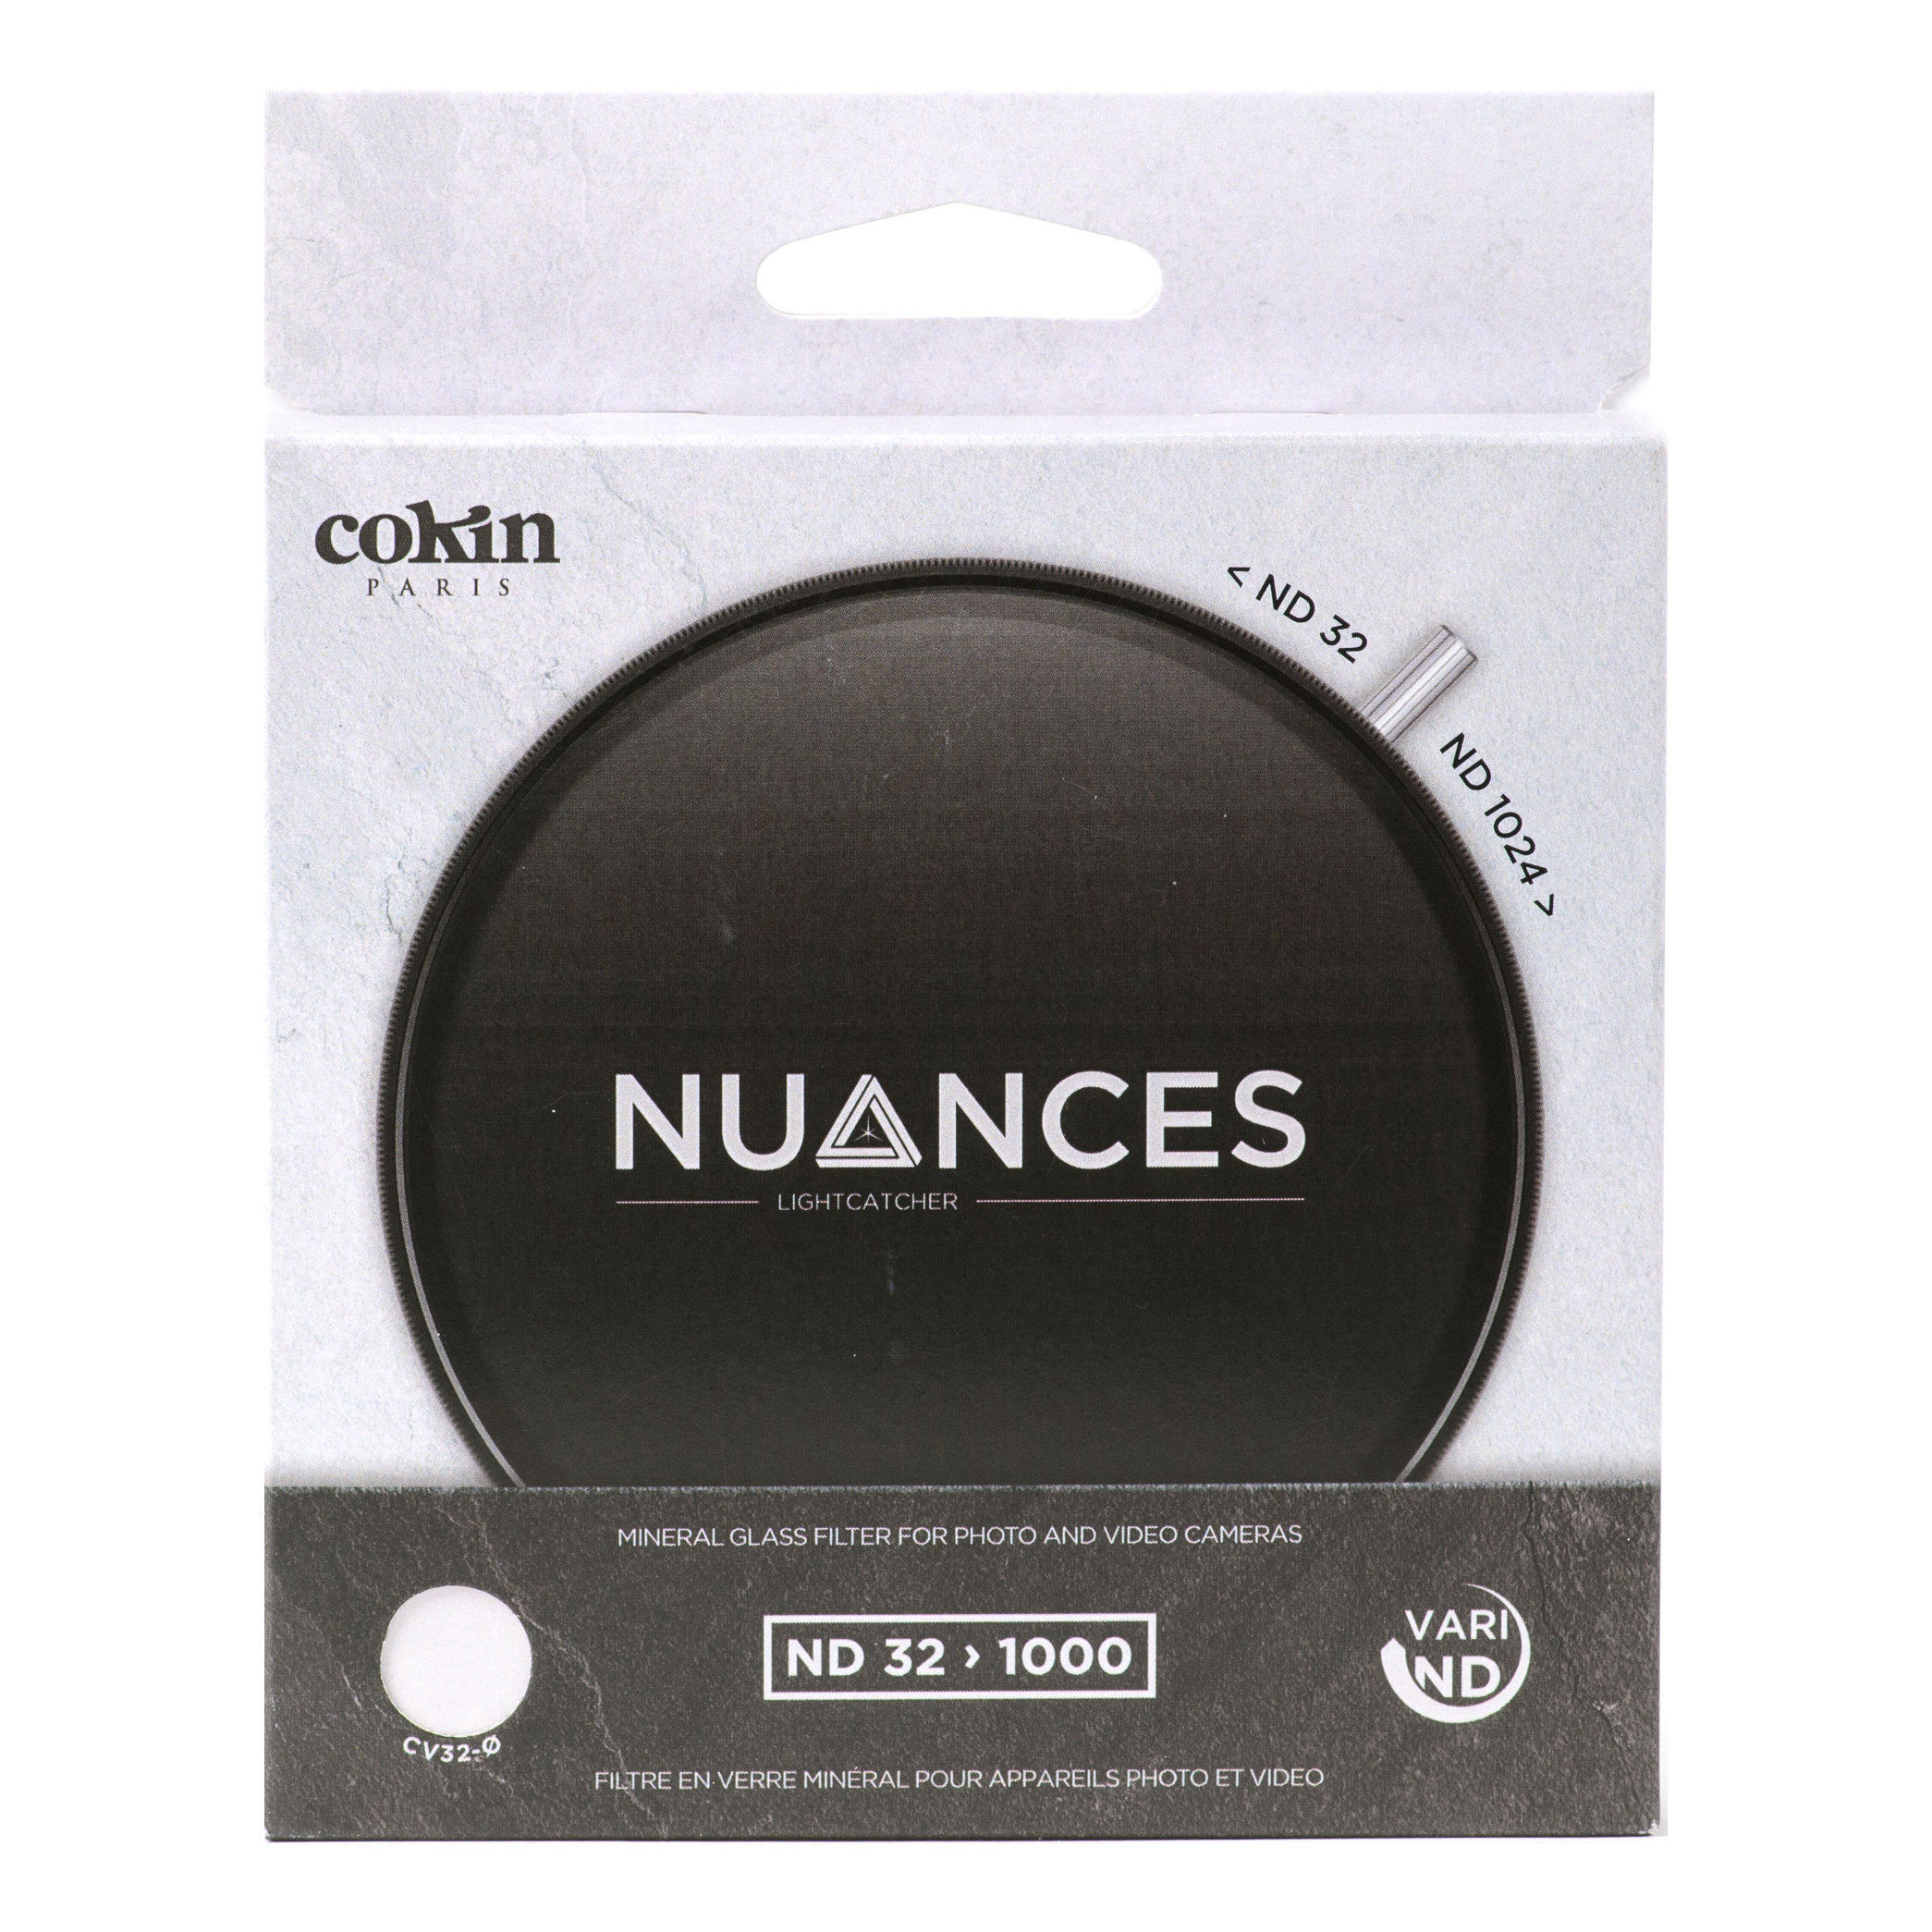 Cokin Round NUANCES NDX 32 1000 67mm 5 10 f stops